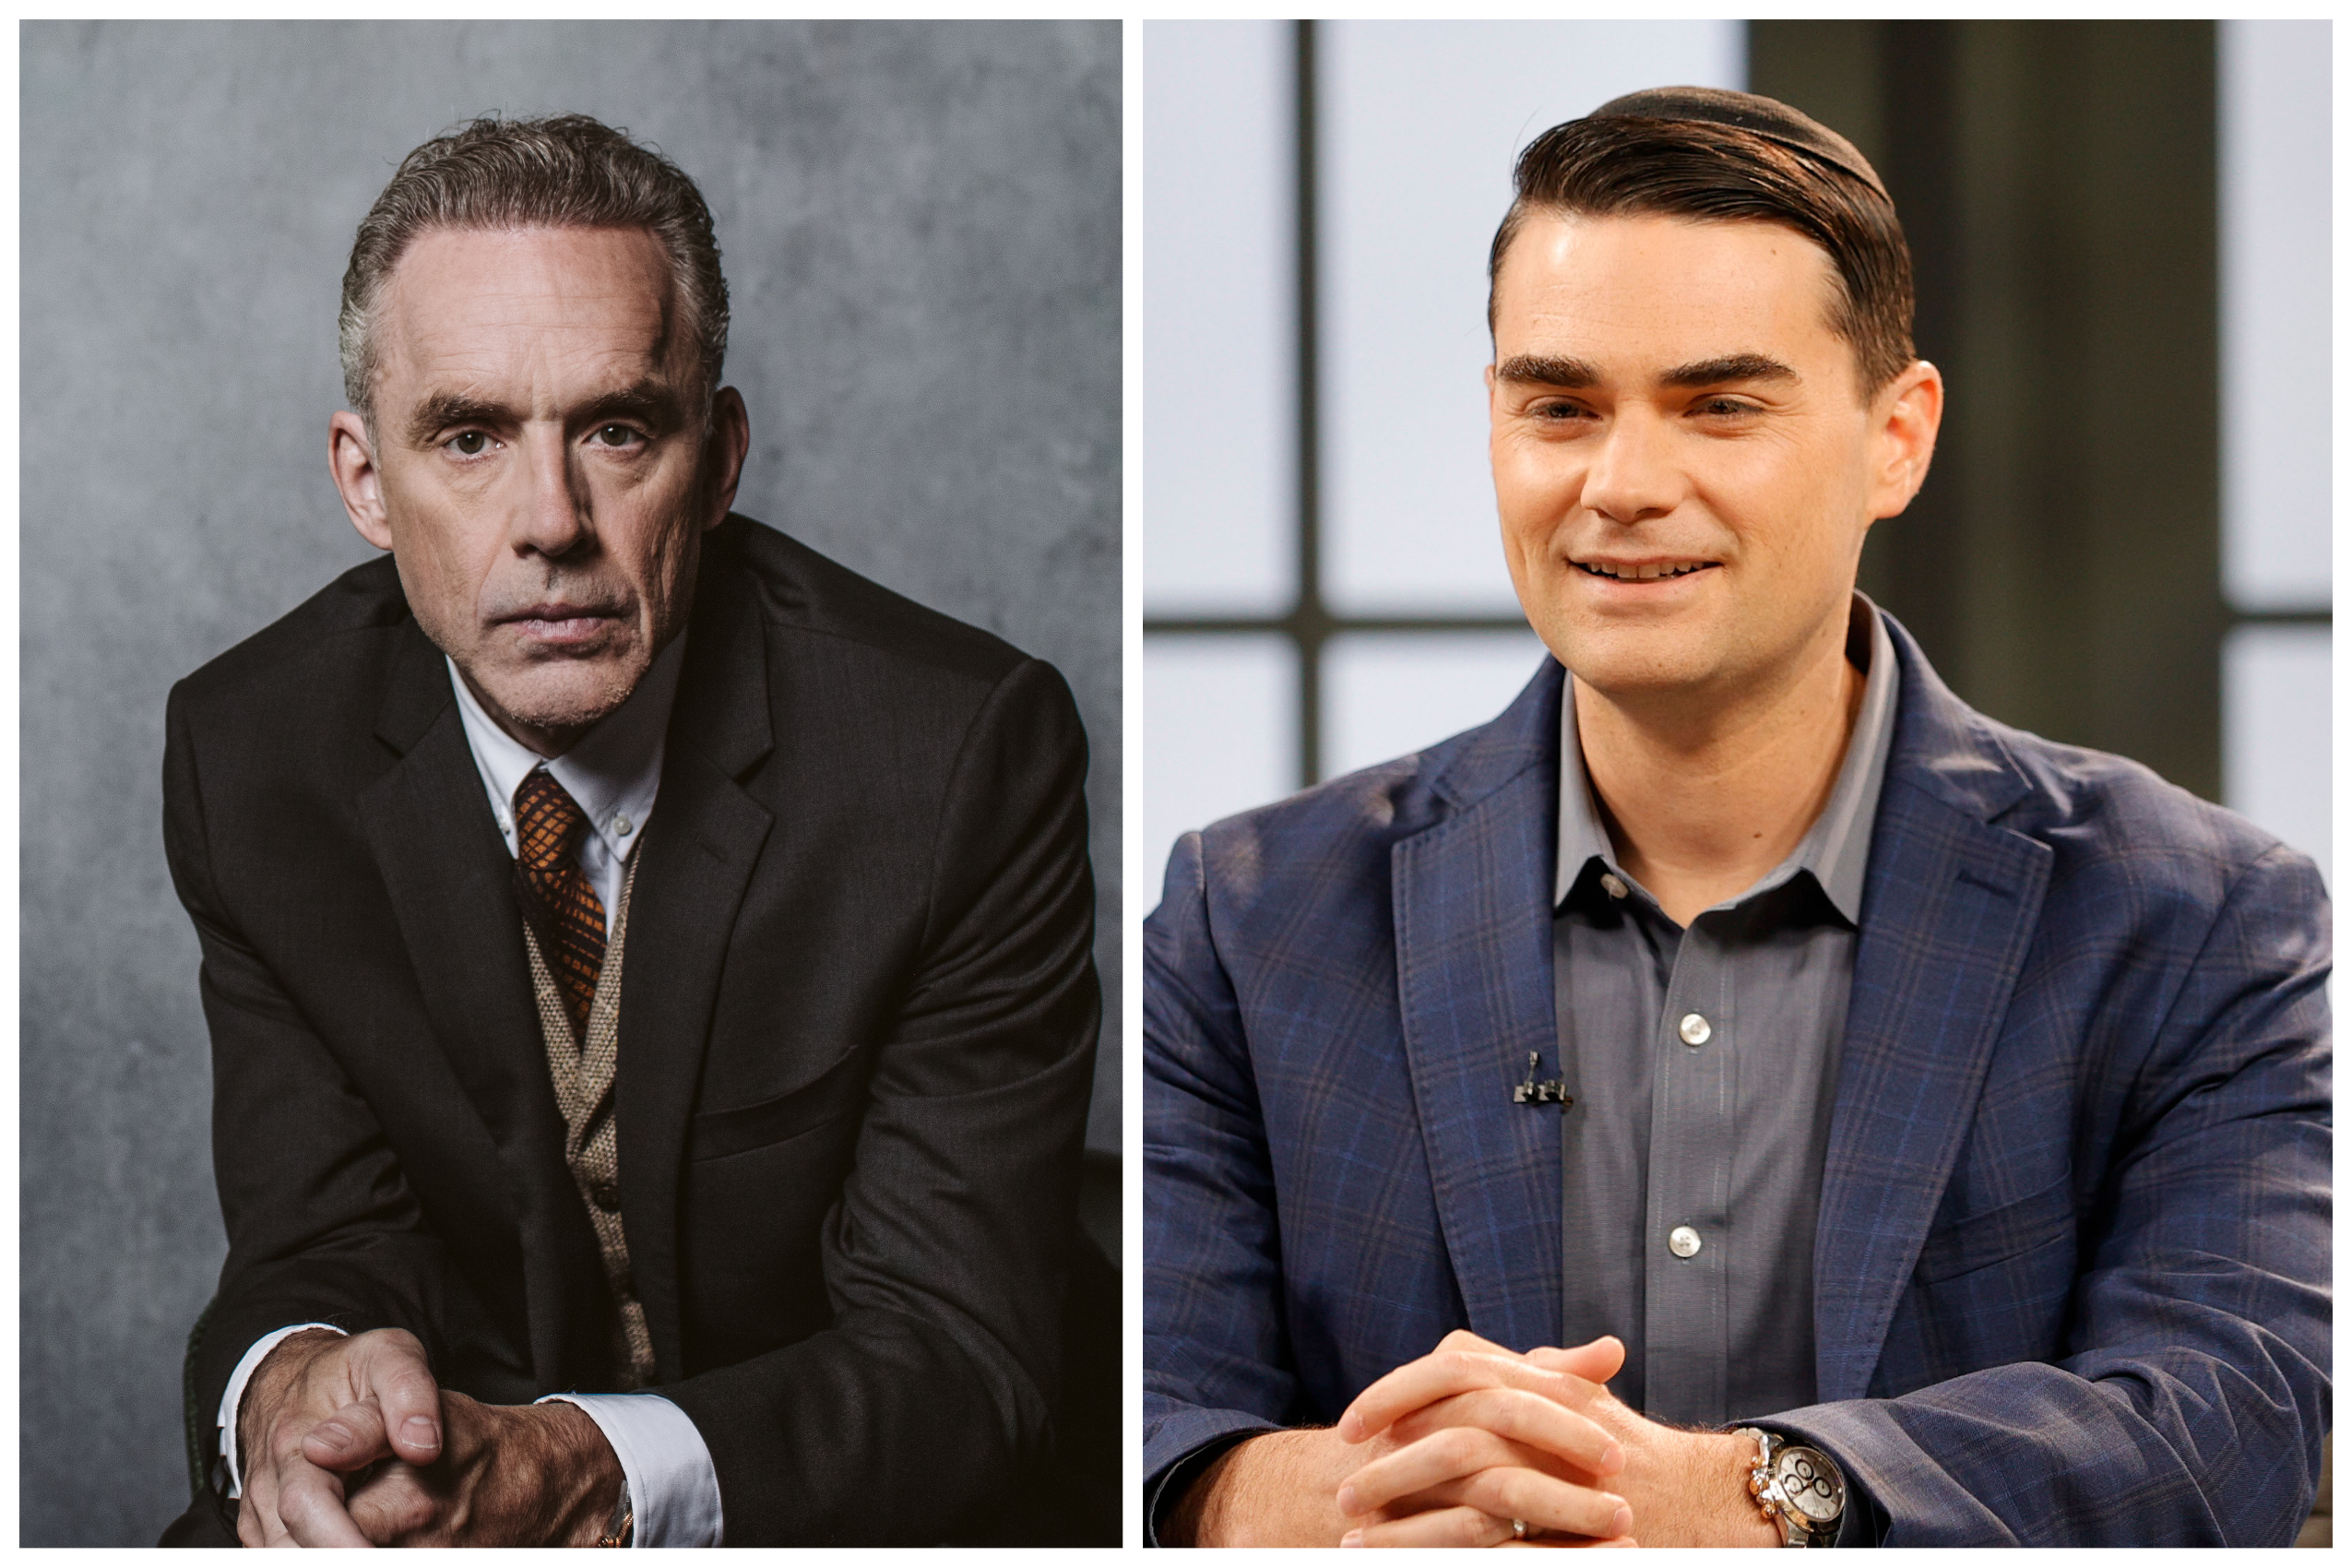 Ben Shapiro, Dr. Jordan B. Peterson, and” Come Back To Him” Discourse Straying From God In New Exodus Show